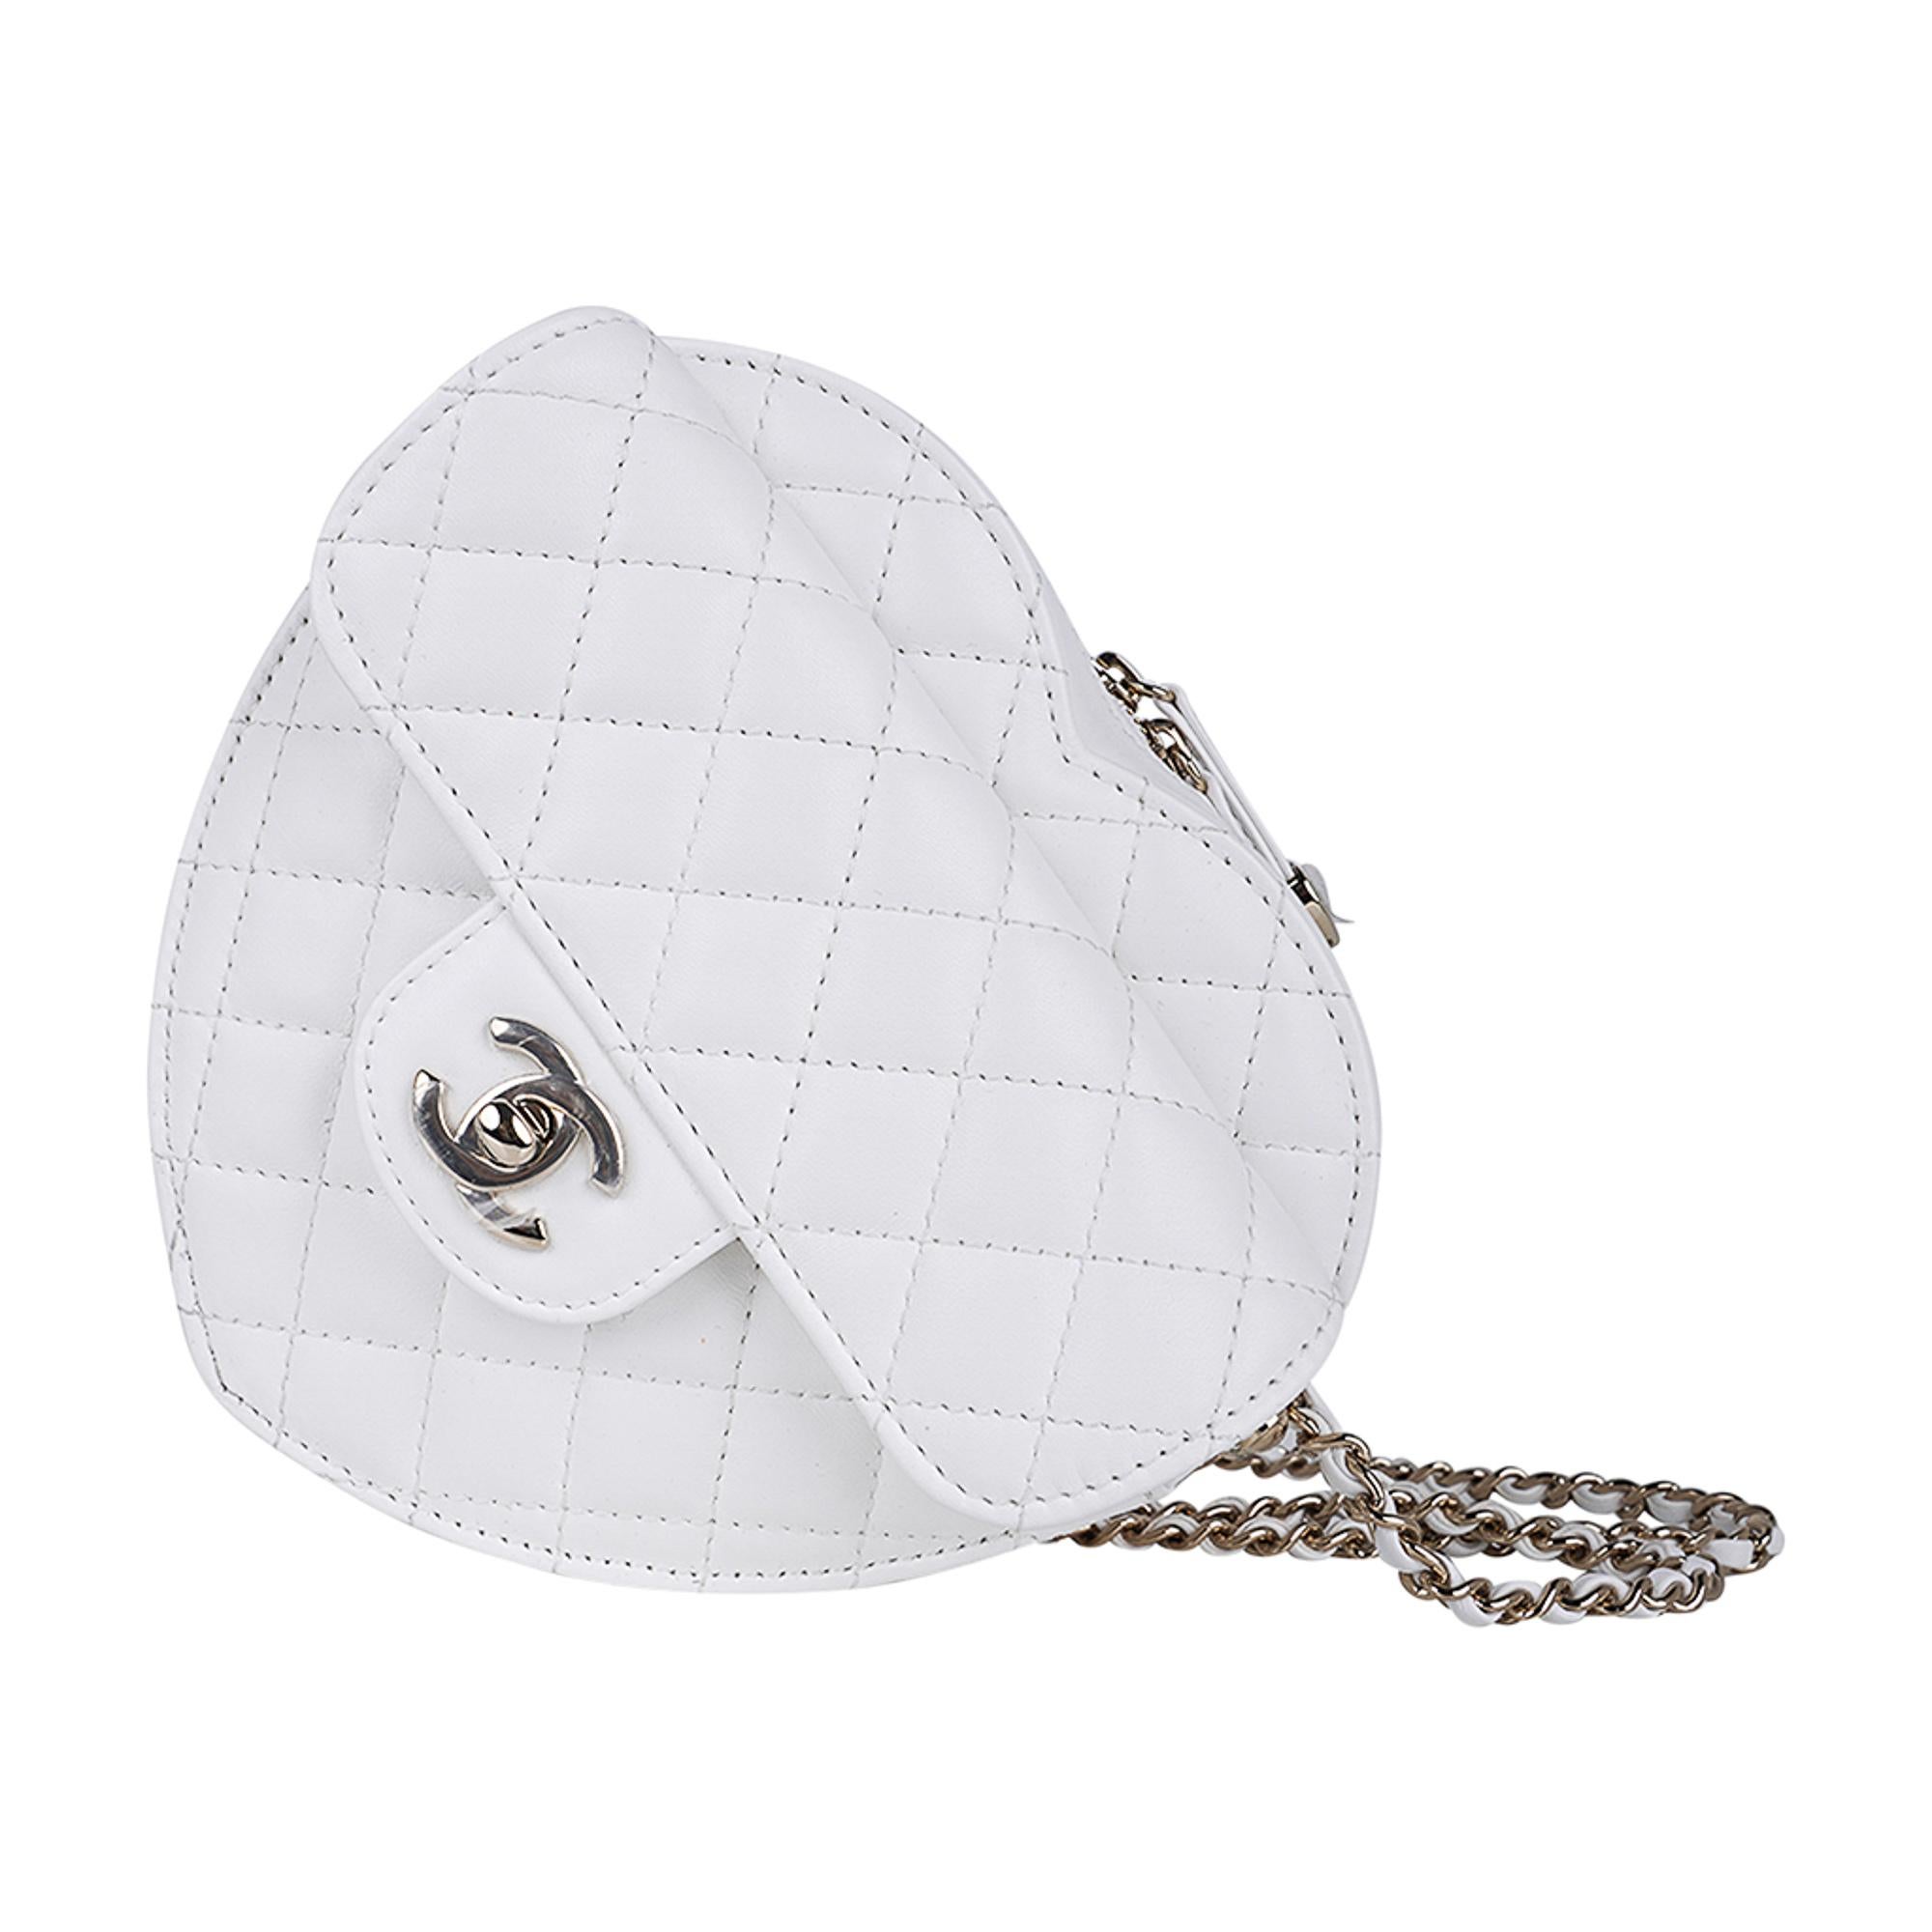 Mightychic offers a flirty and utterly fabulous Limited Edition Chanel Heart Bag 2022 SS featured in white quilted lambskin.
Champagne toned hardware.
A MUST for any Chanel collector.
NEW or NEVER WORN.
Comes with box. 
Mightychic has excelled in